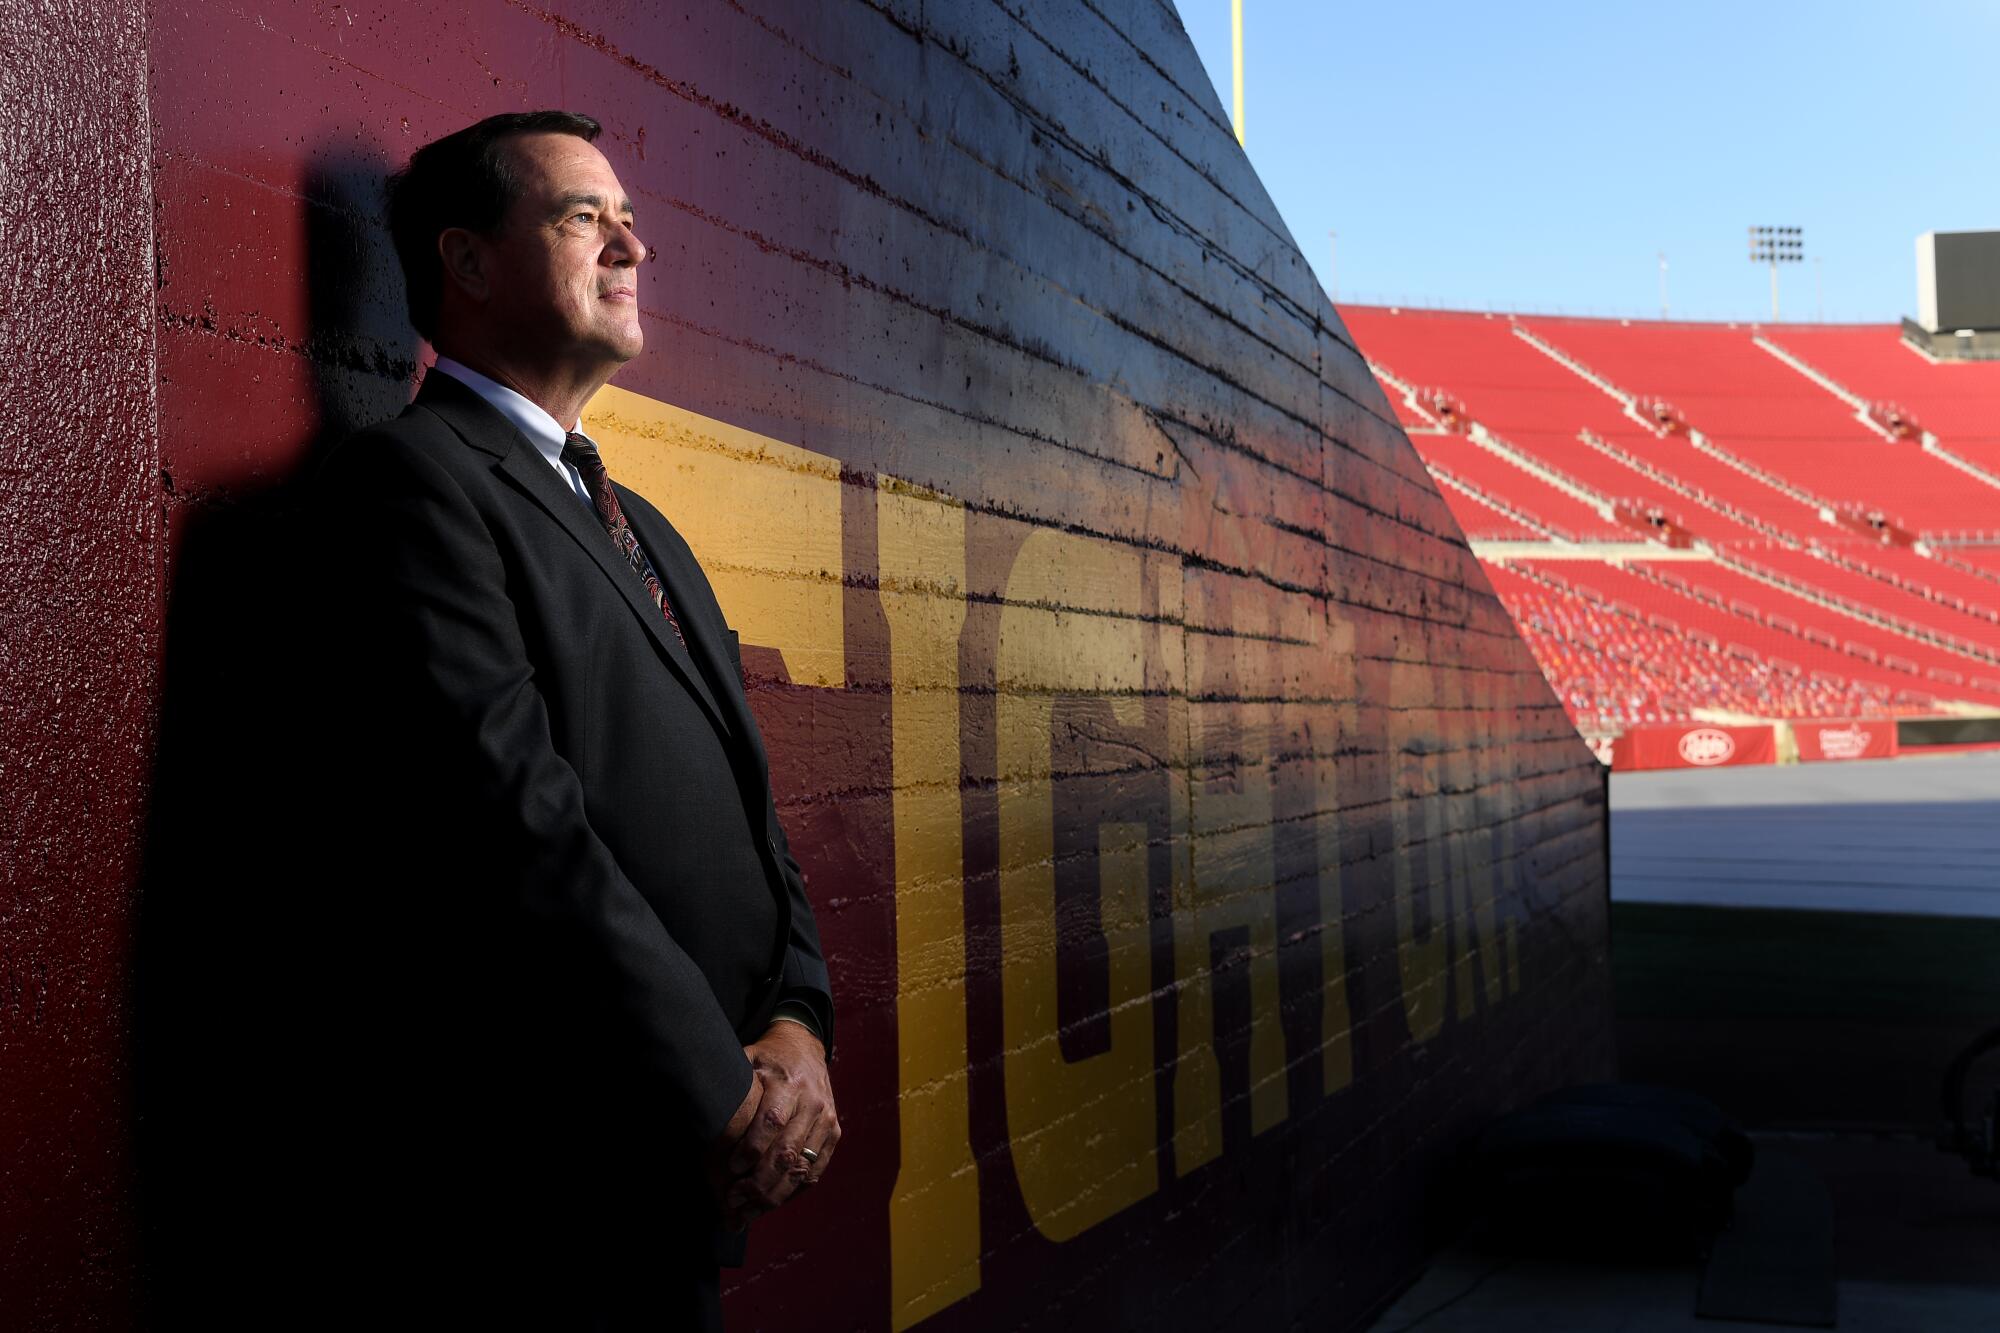 USC athletic director Mike Bohn wears a suit and stands inside the empty Coliseum.